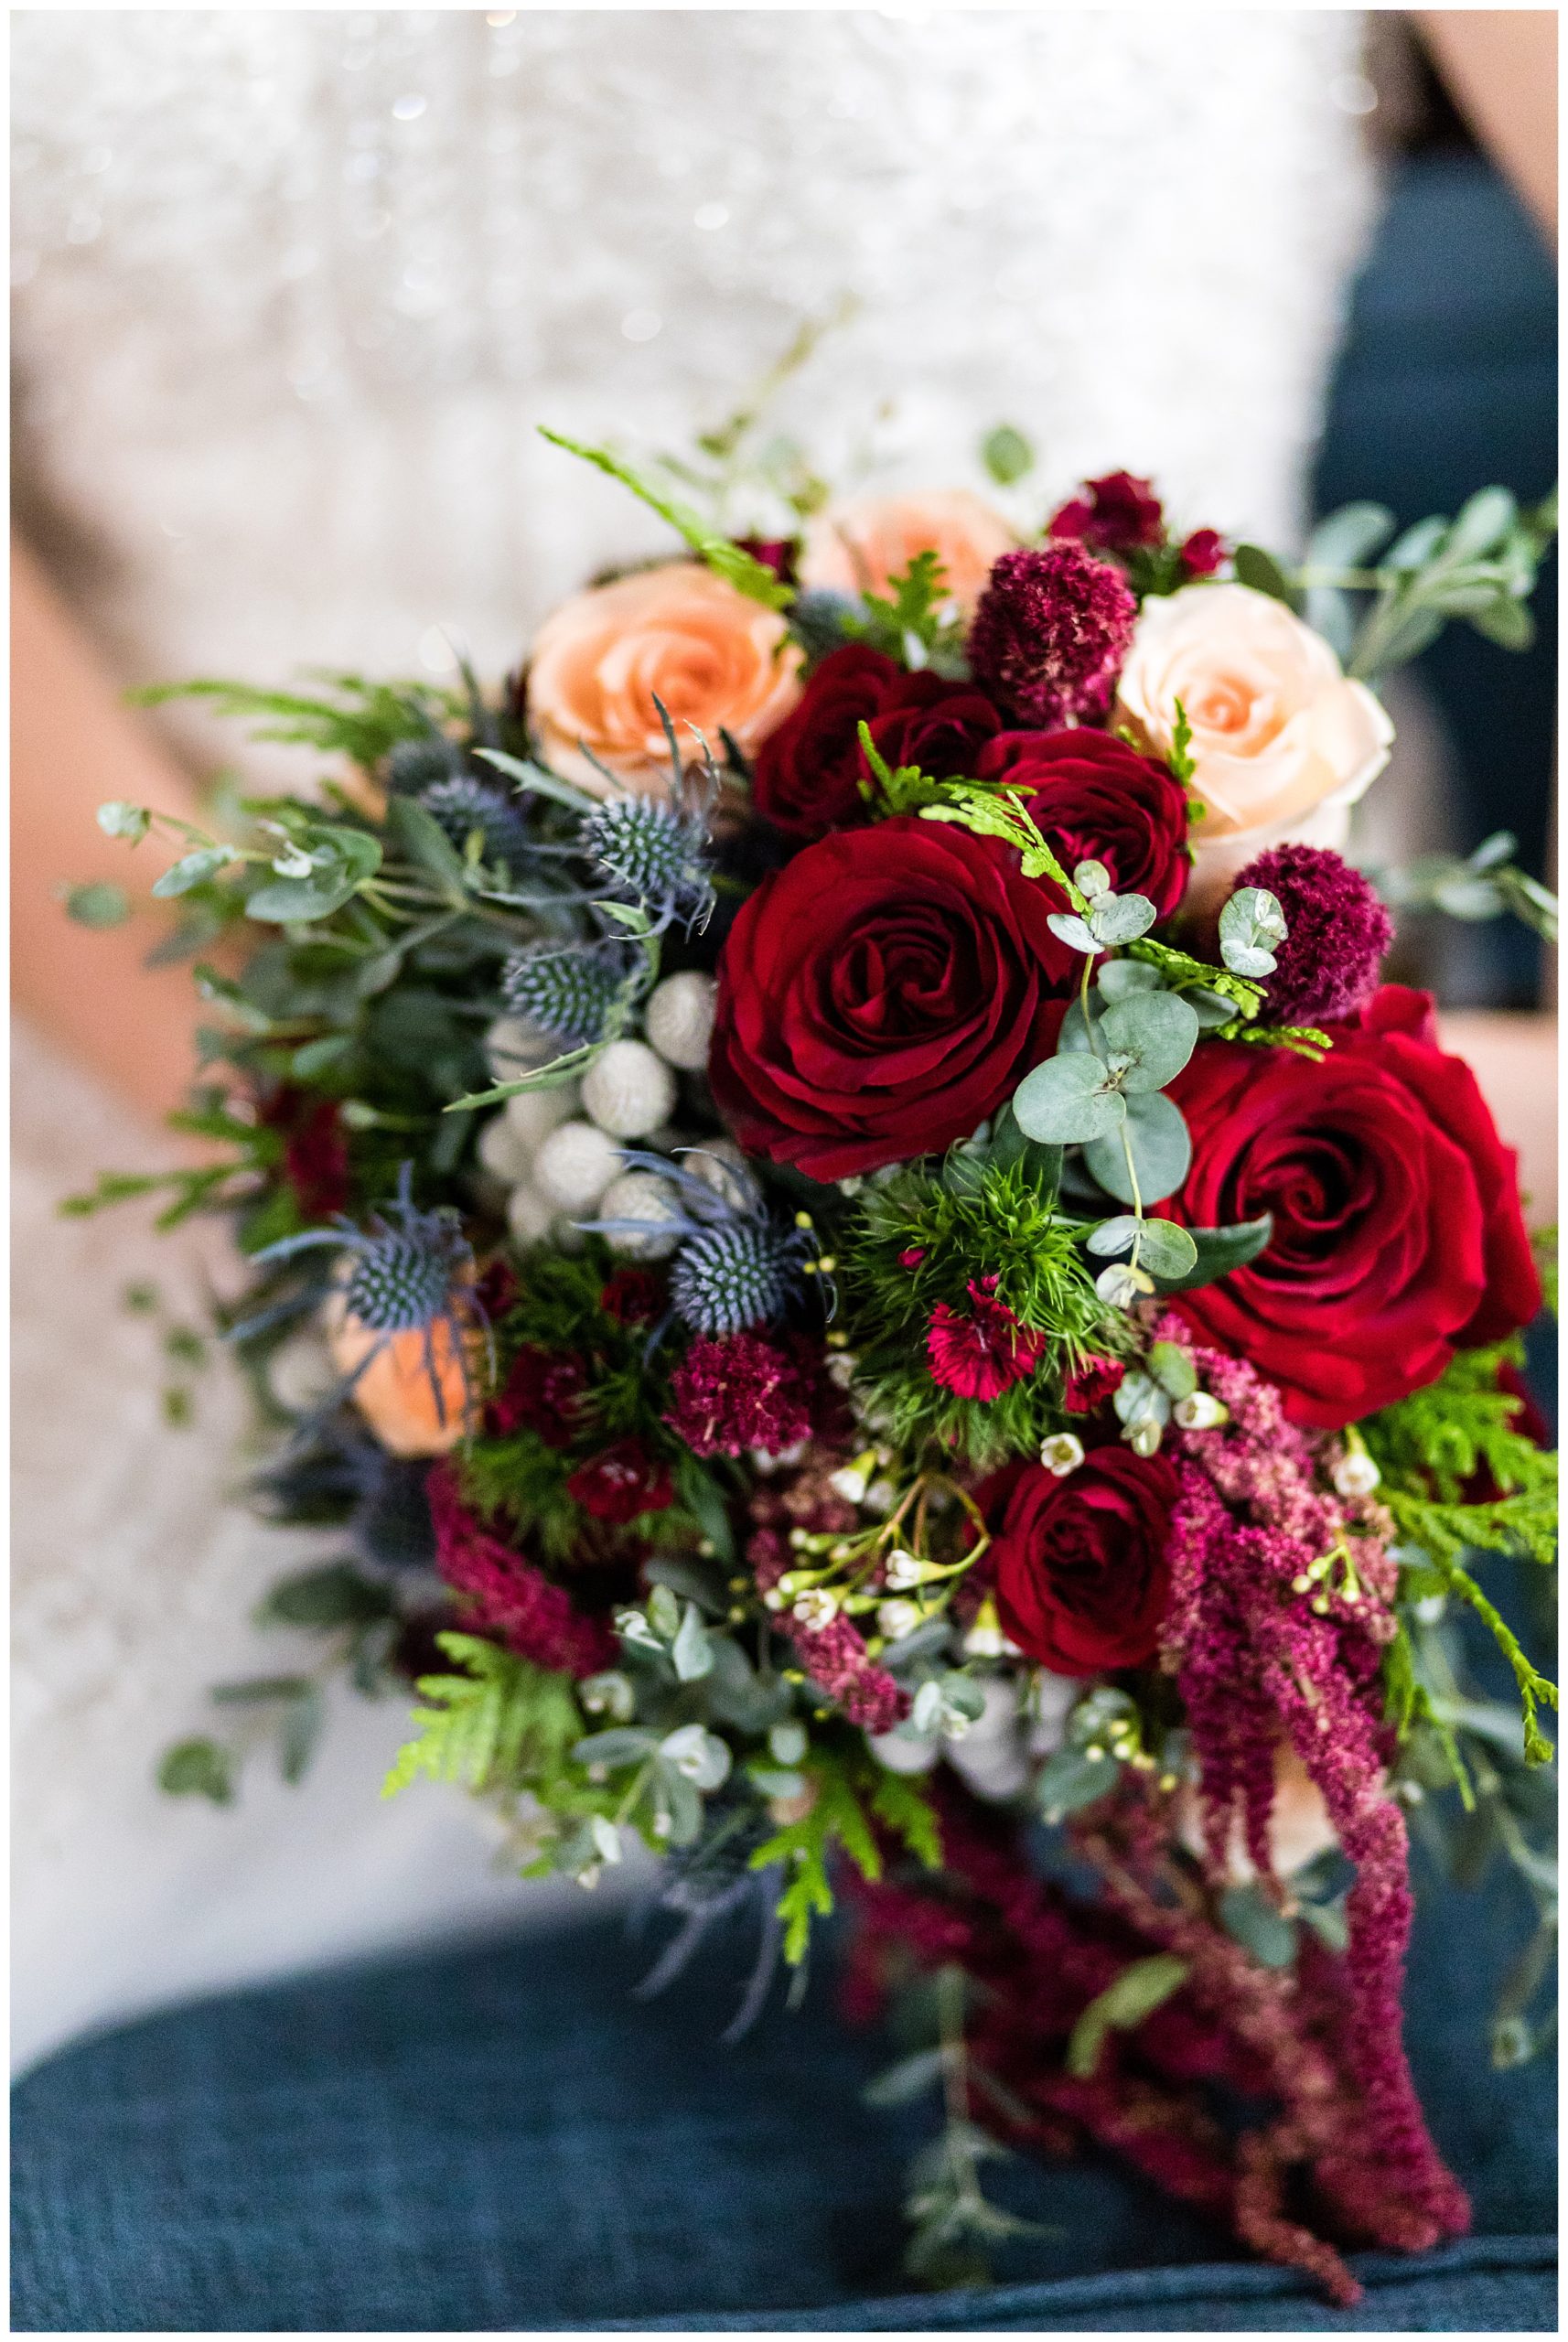 Colorful textured bridal bouquet with red roses